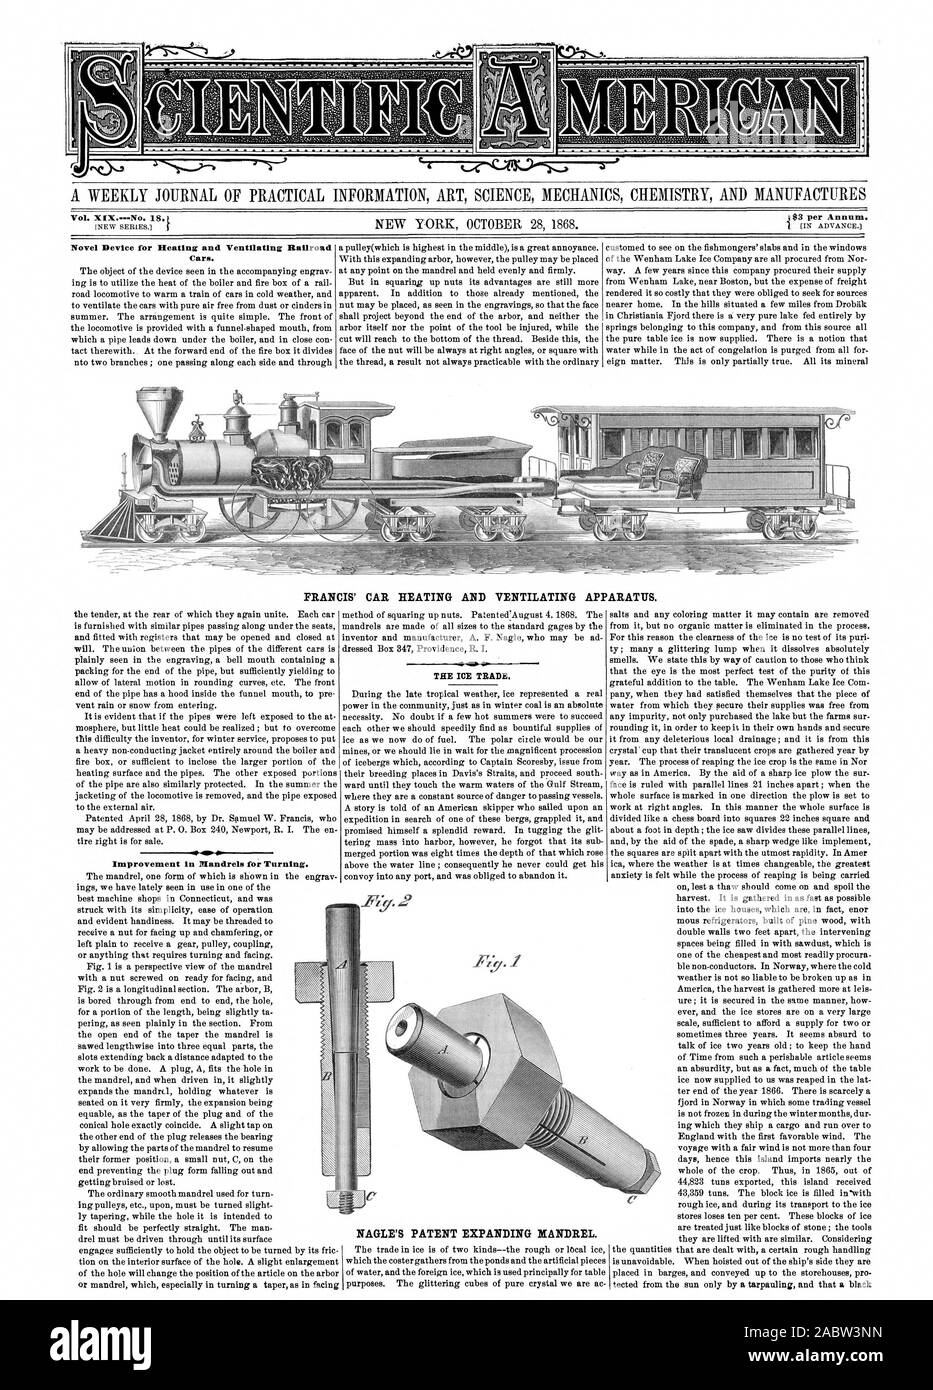 A WEEKLY JOURNAL OF PRACTICAL INFORMATION ART SCIENCE MECHANICS CHEMISTRY AND MANUFACTURES Vol. XIX.No. 18. t Novel Device for Heating and Ventilating Railroad Cars. FRANCIS' CAR HEATING AND VENTILATING APPARATUS. Improvement in Mandrels for Turning. THE ICE TRADE. NAGLE'S PATENT EXPANDING MANDREL., scientific american, 1868-10-28 Stock Photo